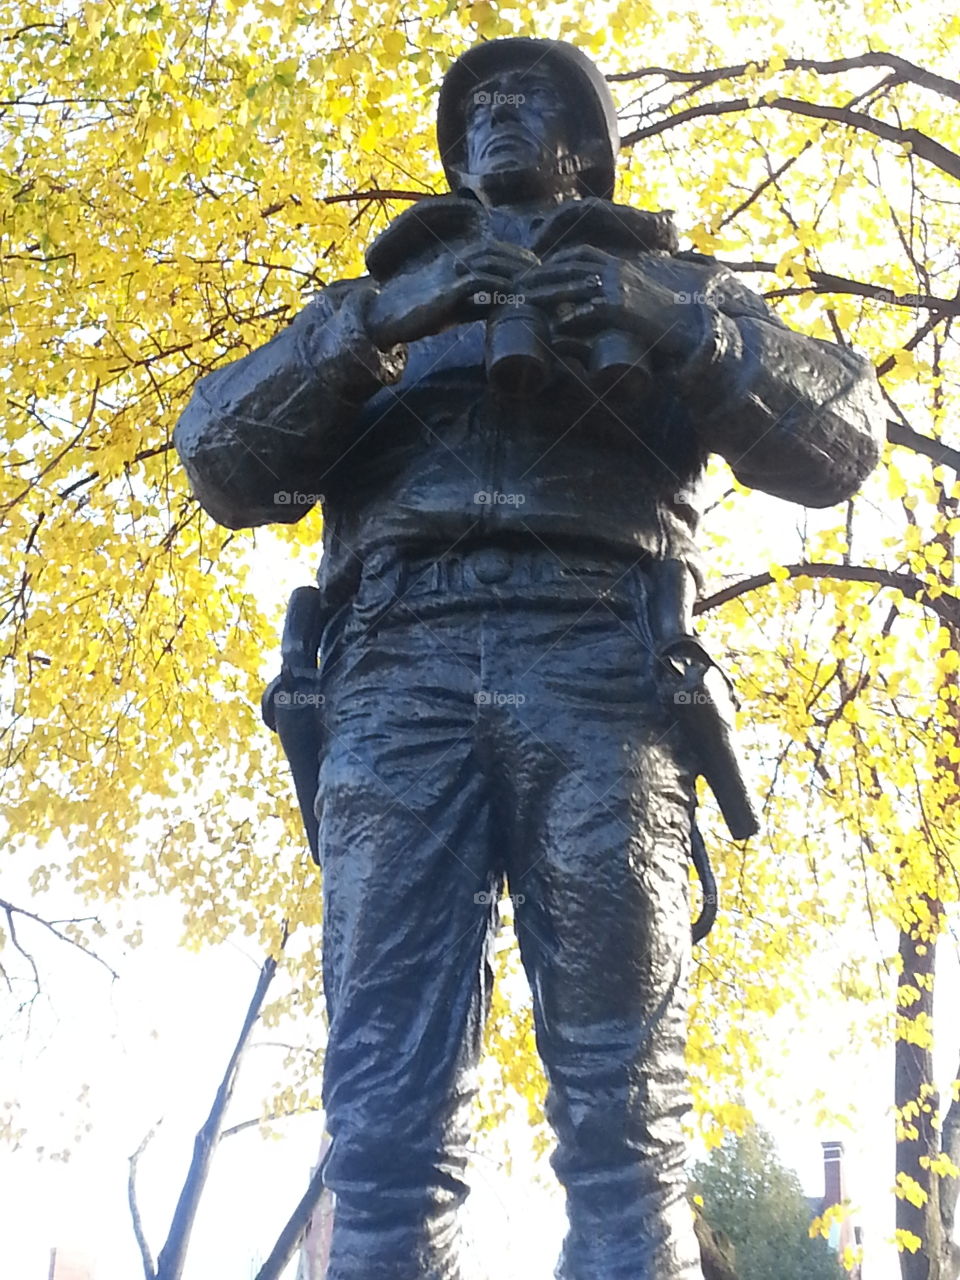 Fall in a Boston park. A statue seemed illuminated by the bright leaves